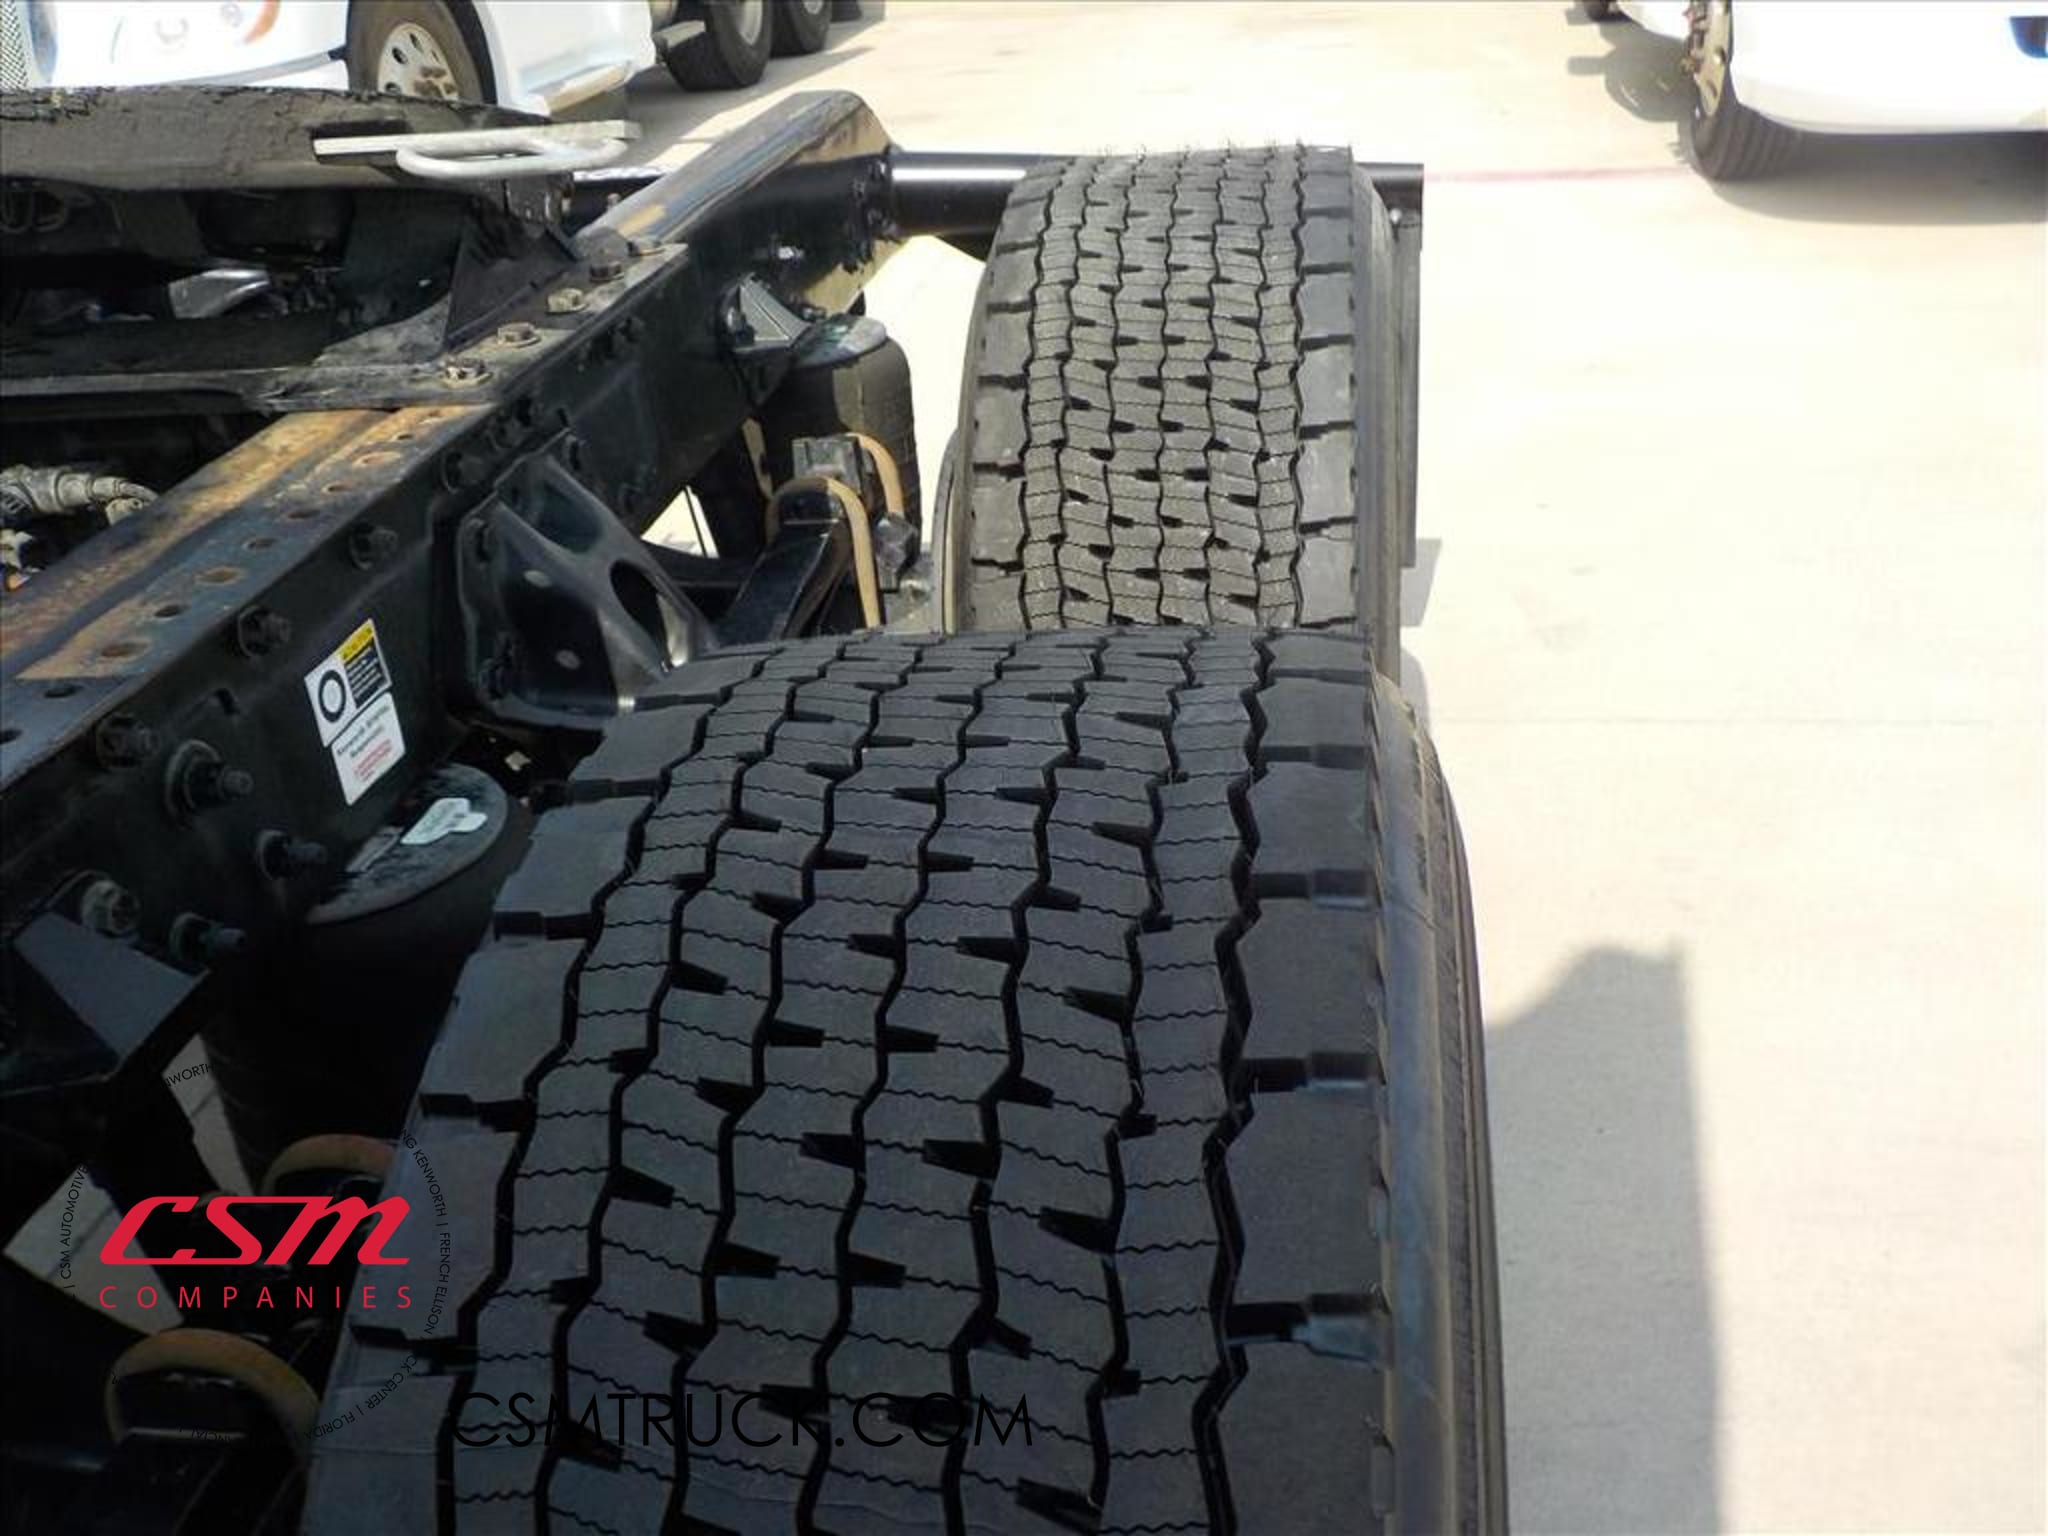 Driver side rear frame and tire tread for this 2019 Kenworth T680 (Stock number: UKJ233176)